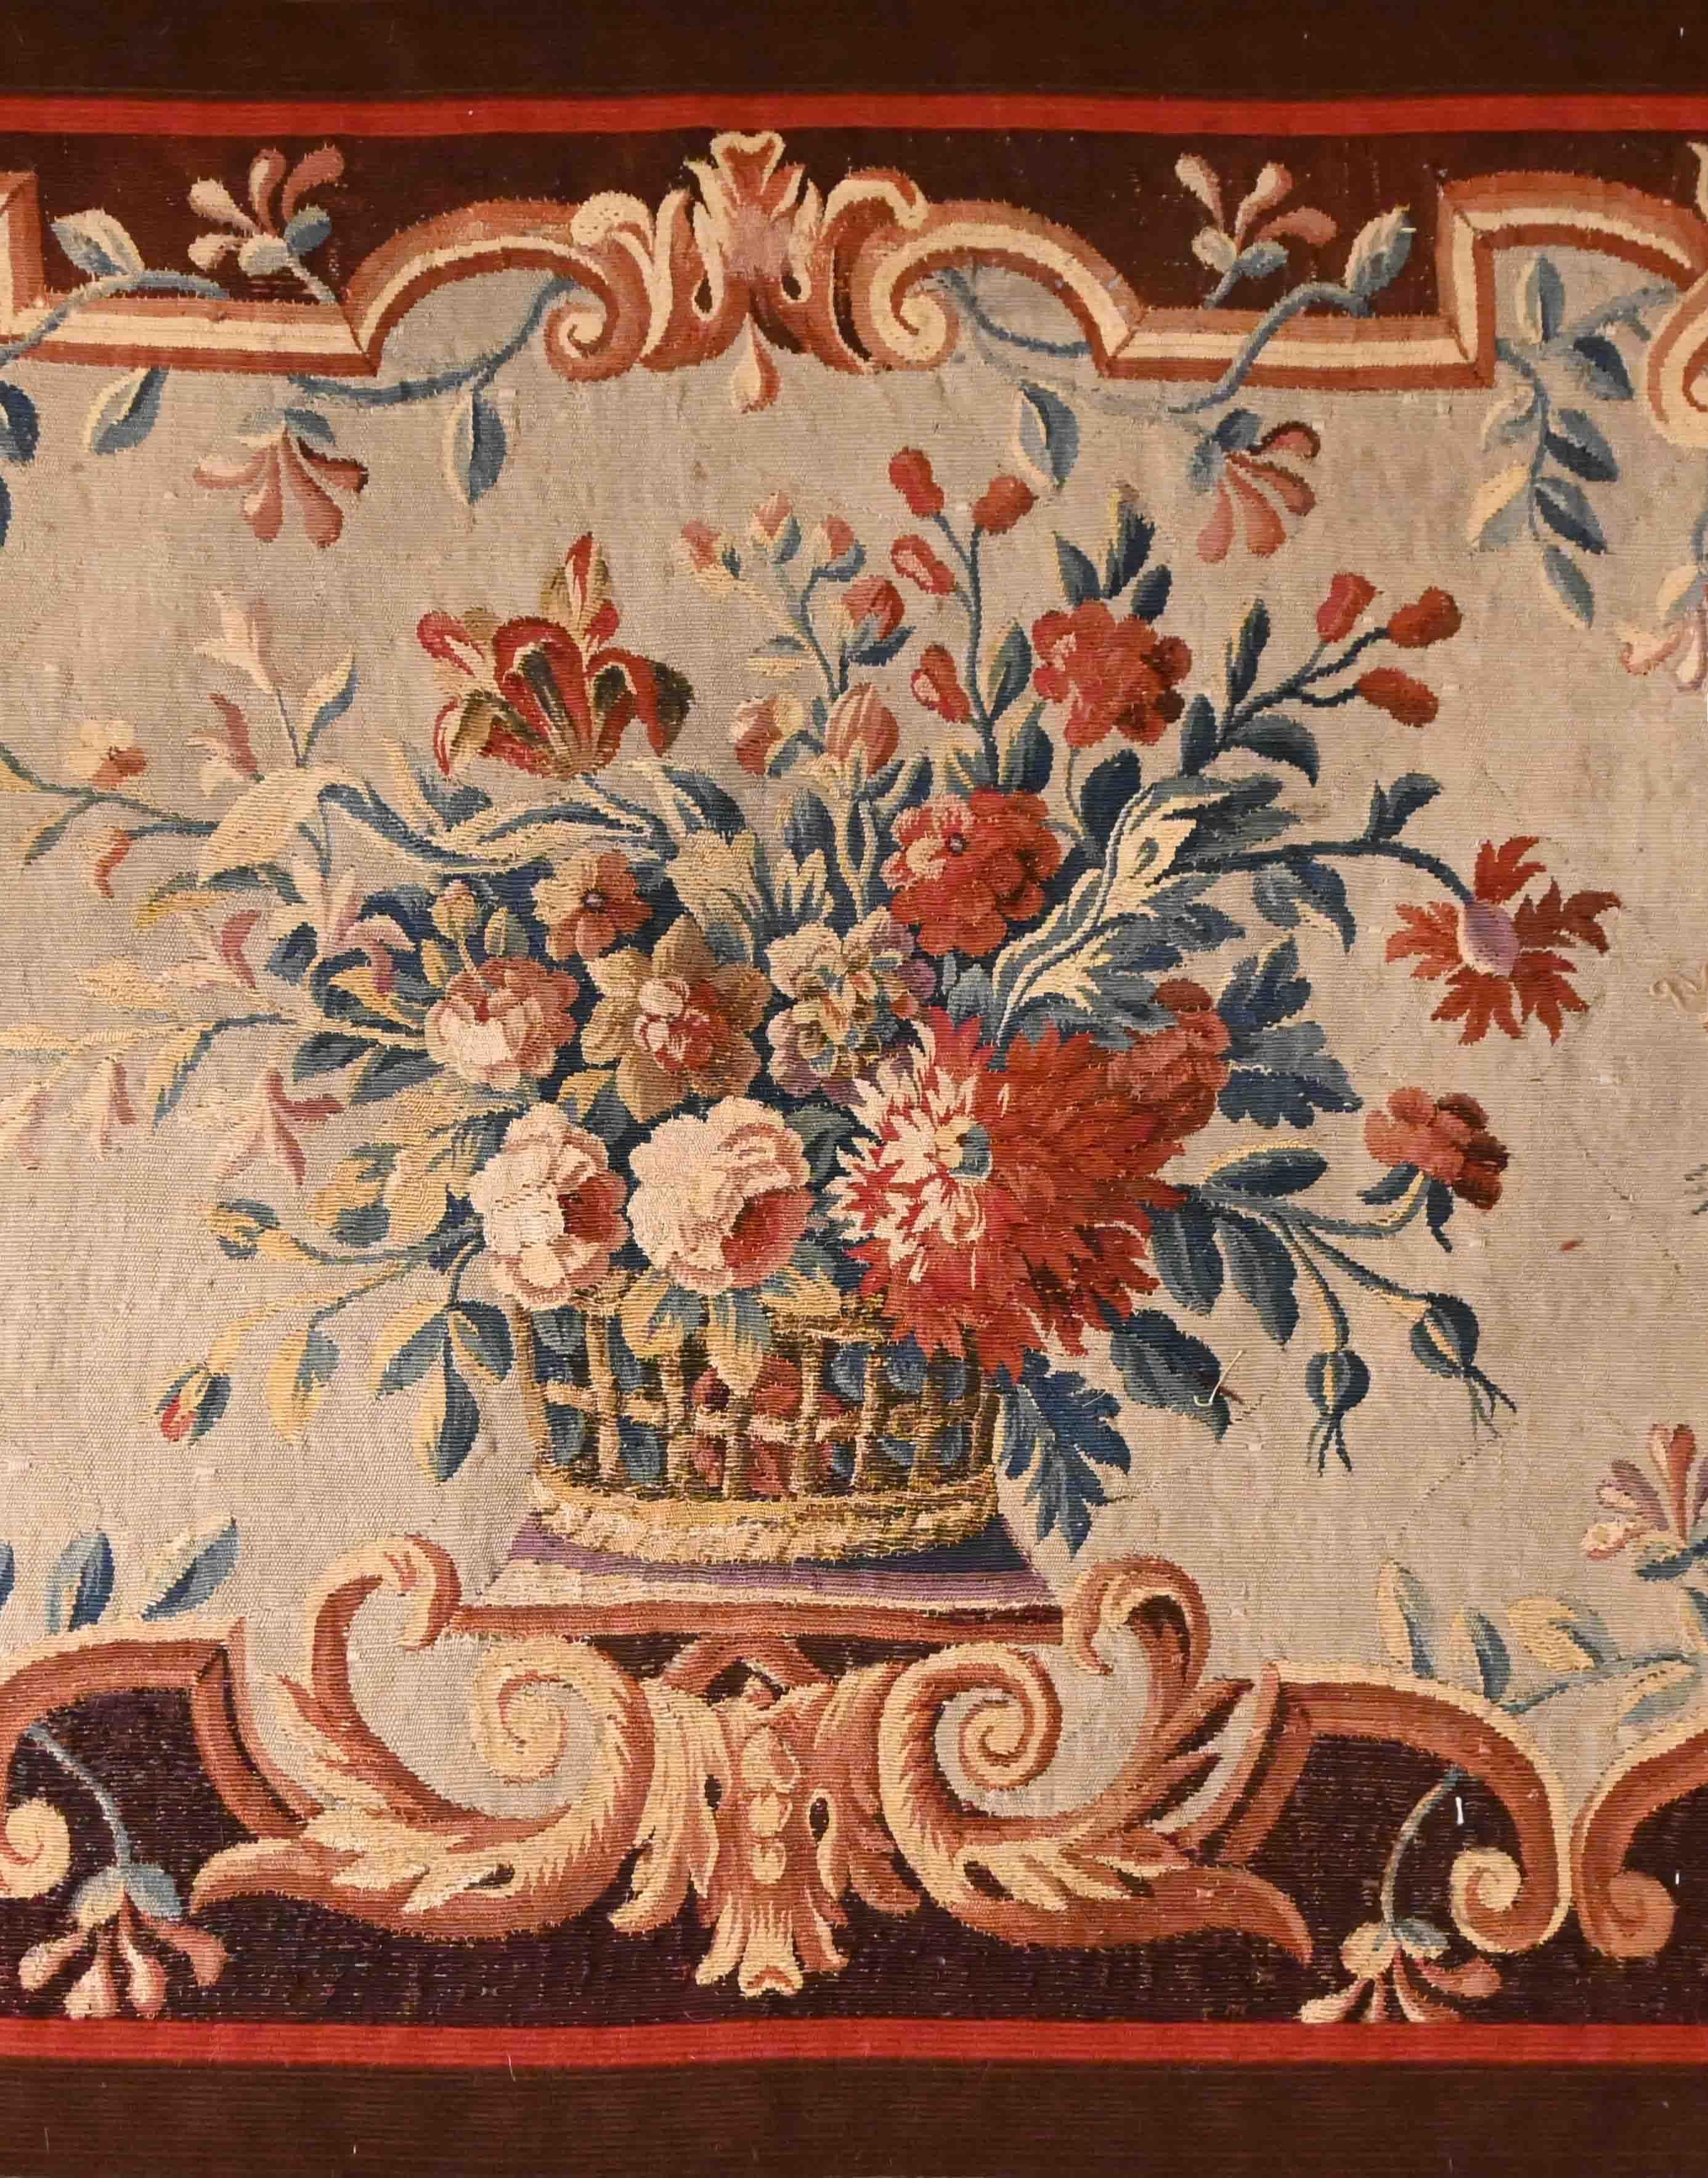 Hand-Woven Floral Brussels Tapestry 18th Century - L 185 x H 85 cm - N° 1360 For Sale